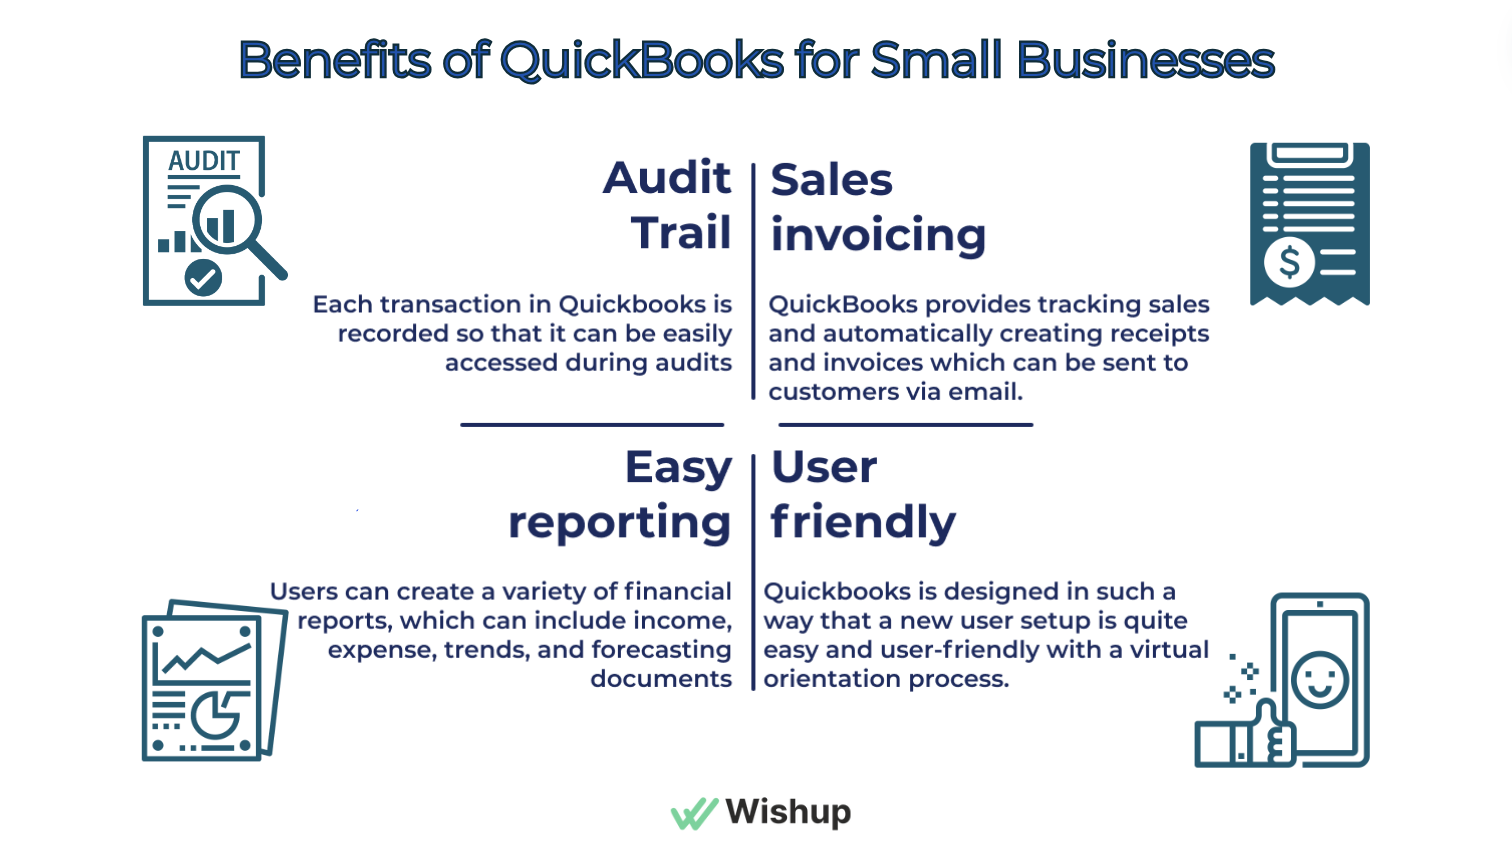 How QuickBooks Can Help Your Small Business